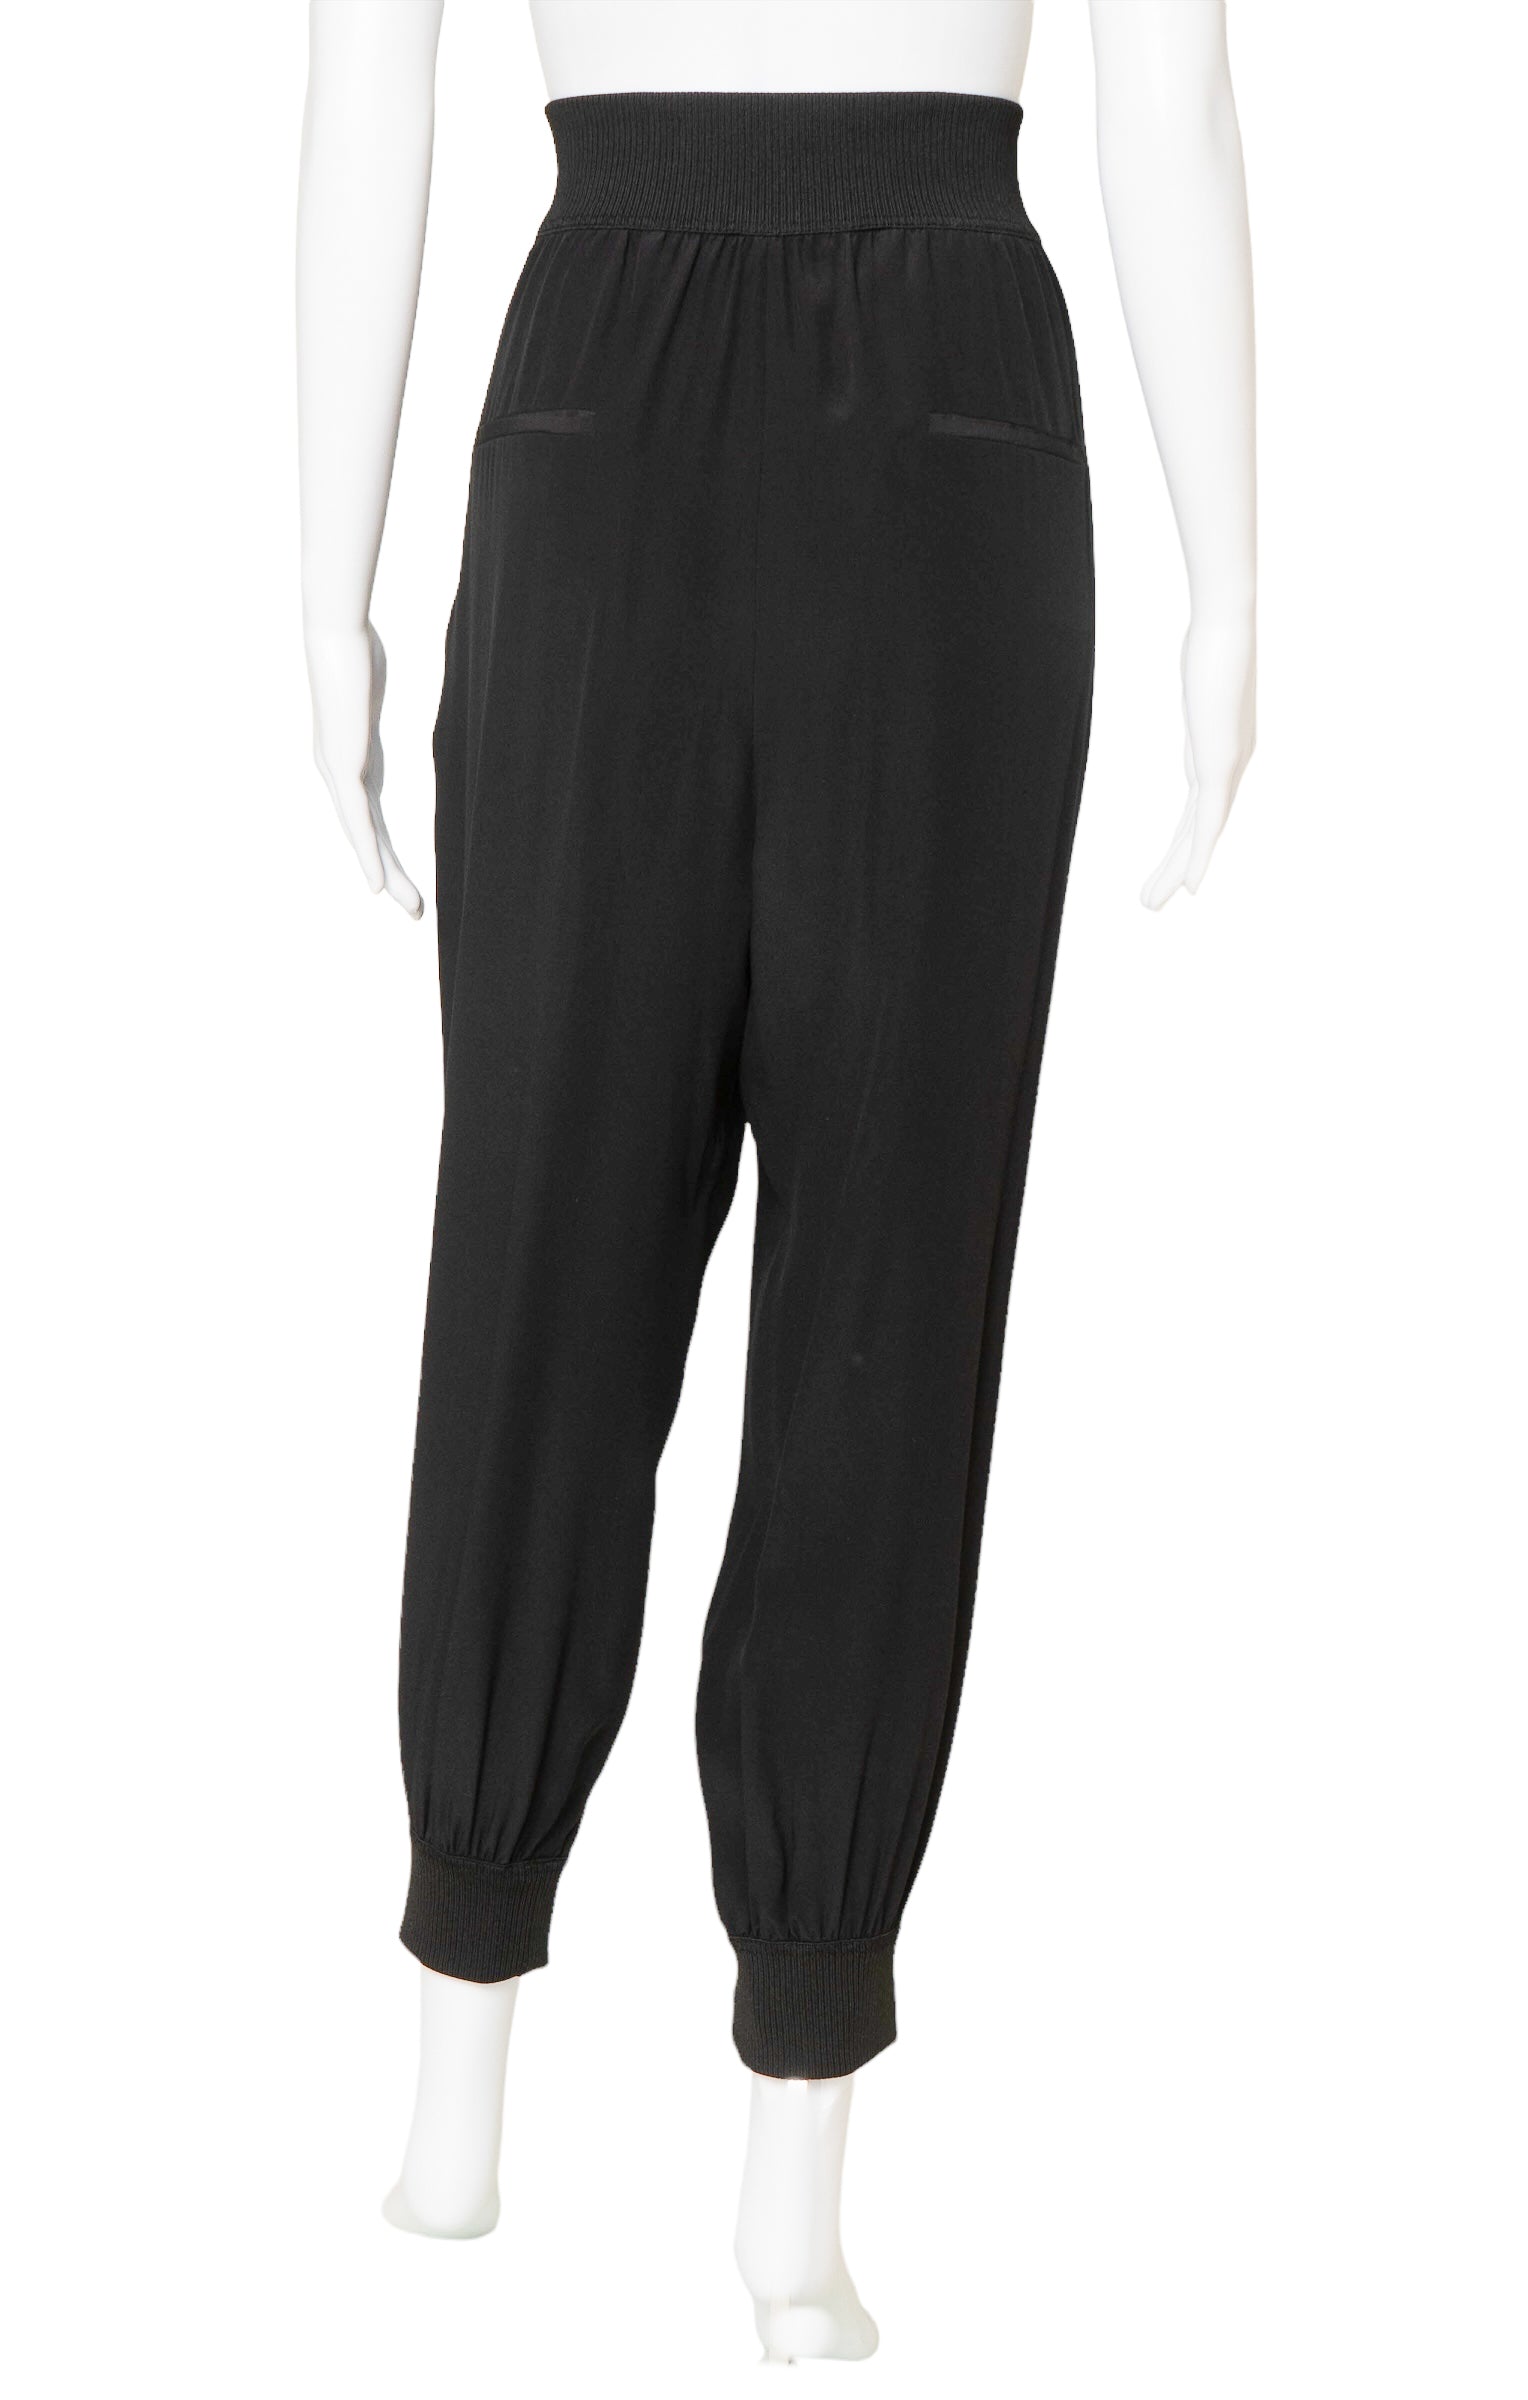 FENDI (RARE) Pants Size: IT 42 / Comparable to US 4-6